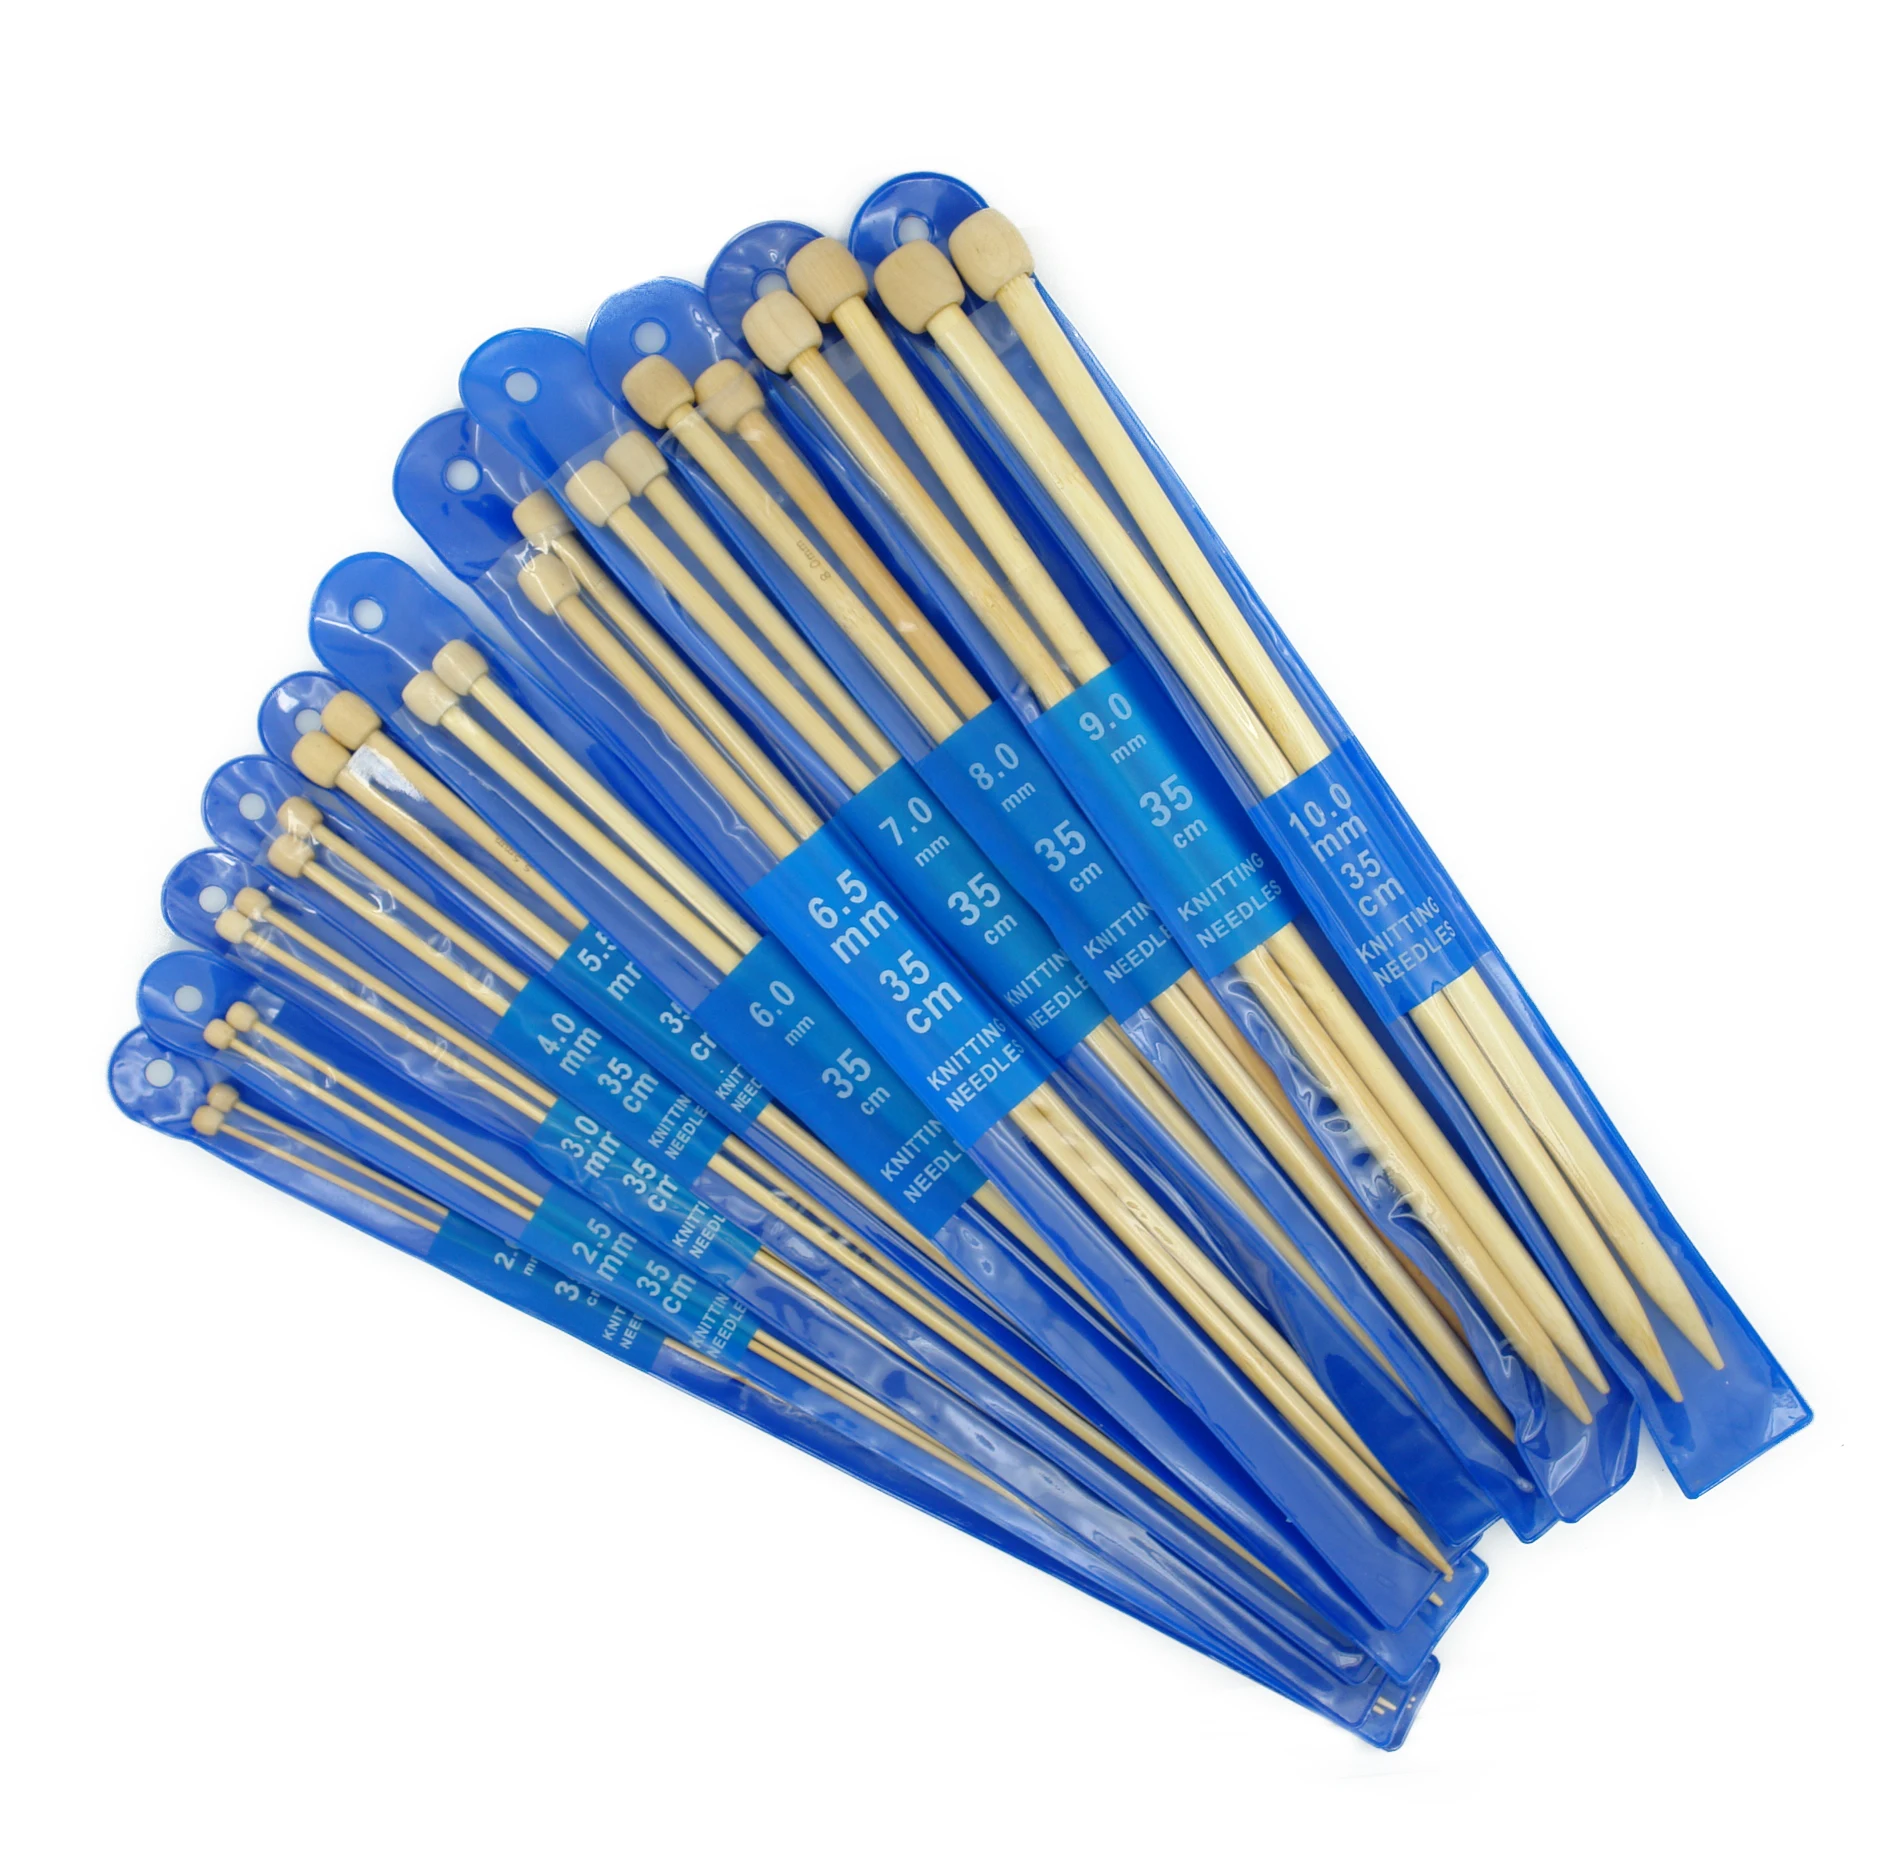 

Single point 35cm bamboo wooden knitting needles set with 2.0 mm-25.0 mm for hand knitting use